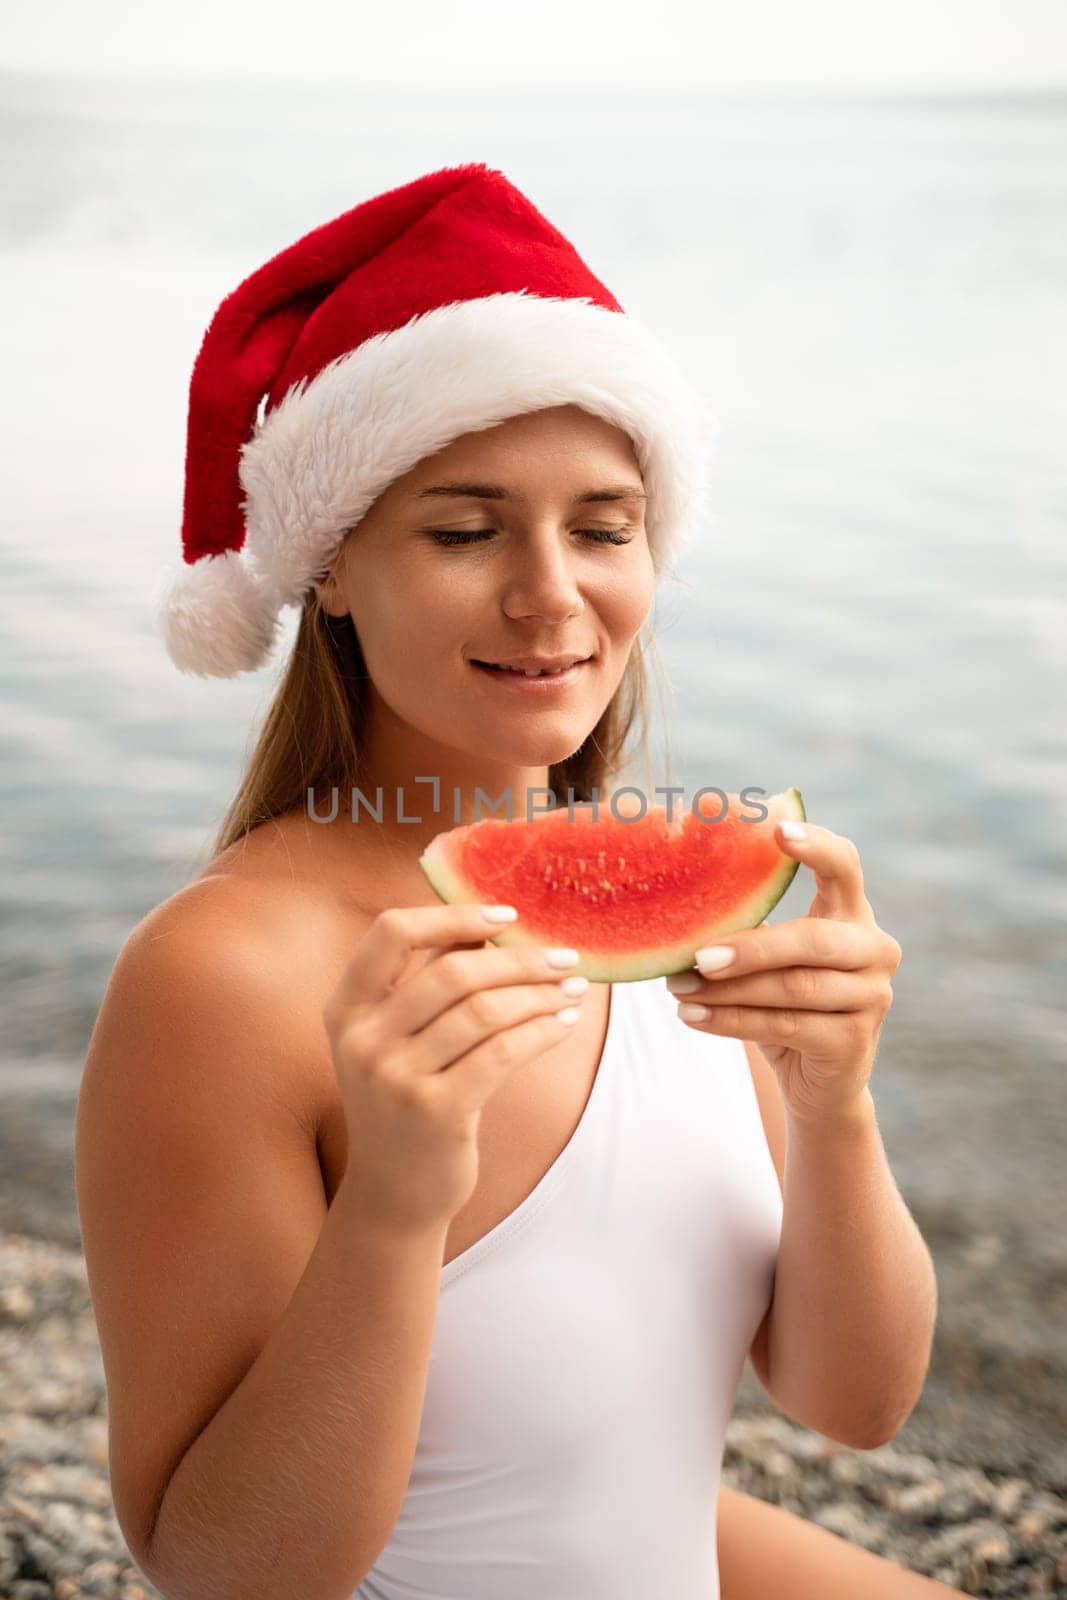 A woman is sitting on the beach and eating a watermelon. She is wearing a red santa hat and a white bikini top. Scene is lighthearted and fun